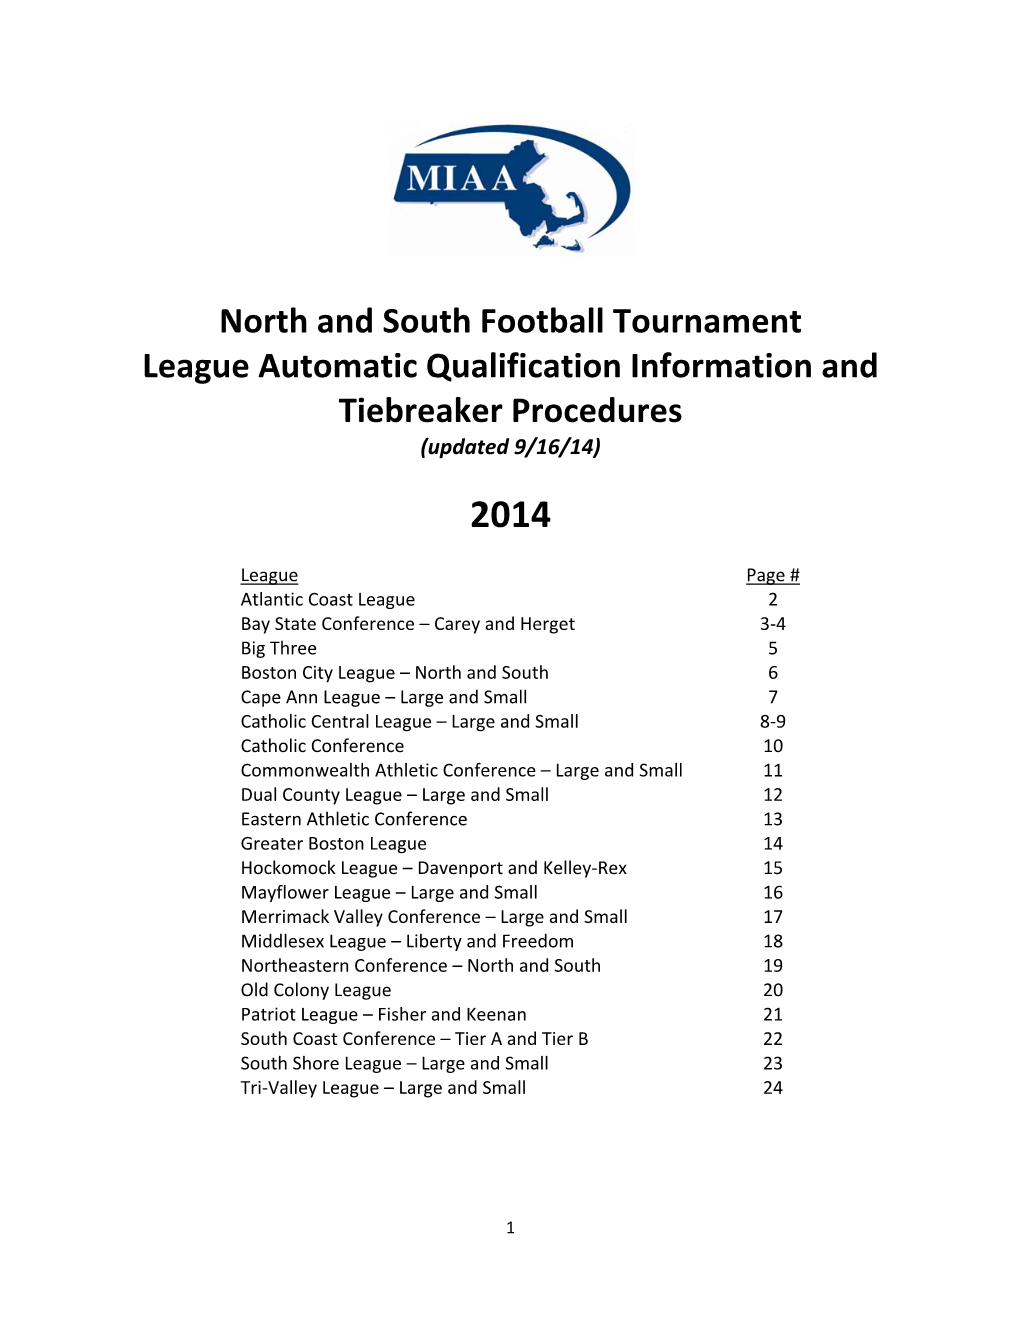 North and South Football Tournament League Automatic Qualification Information and Tiebreaker Procedures (Updated 9/16/14)